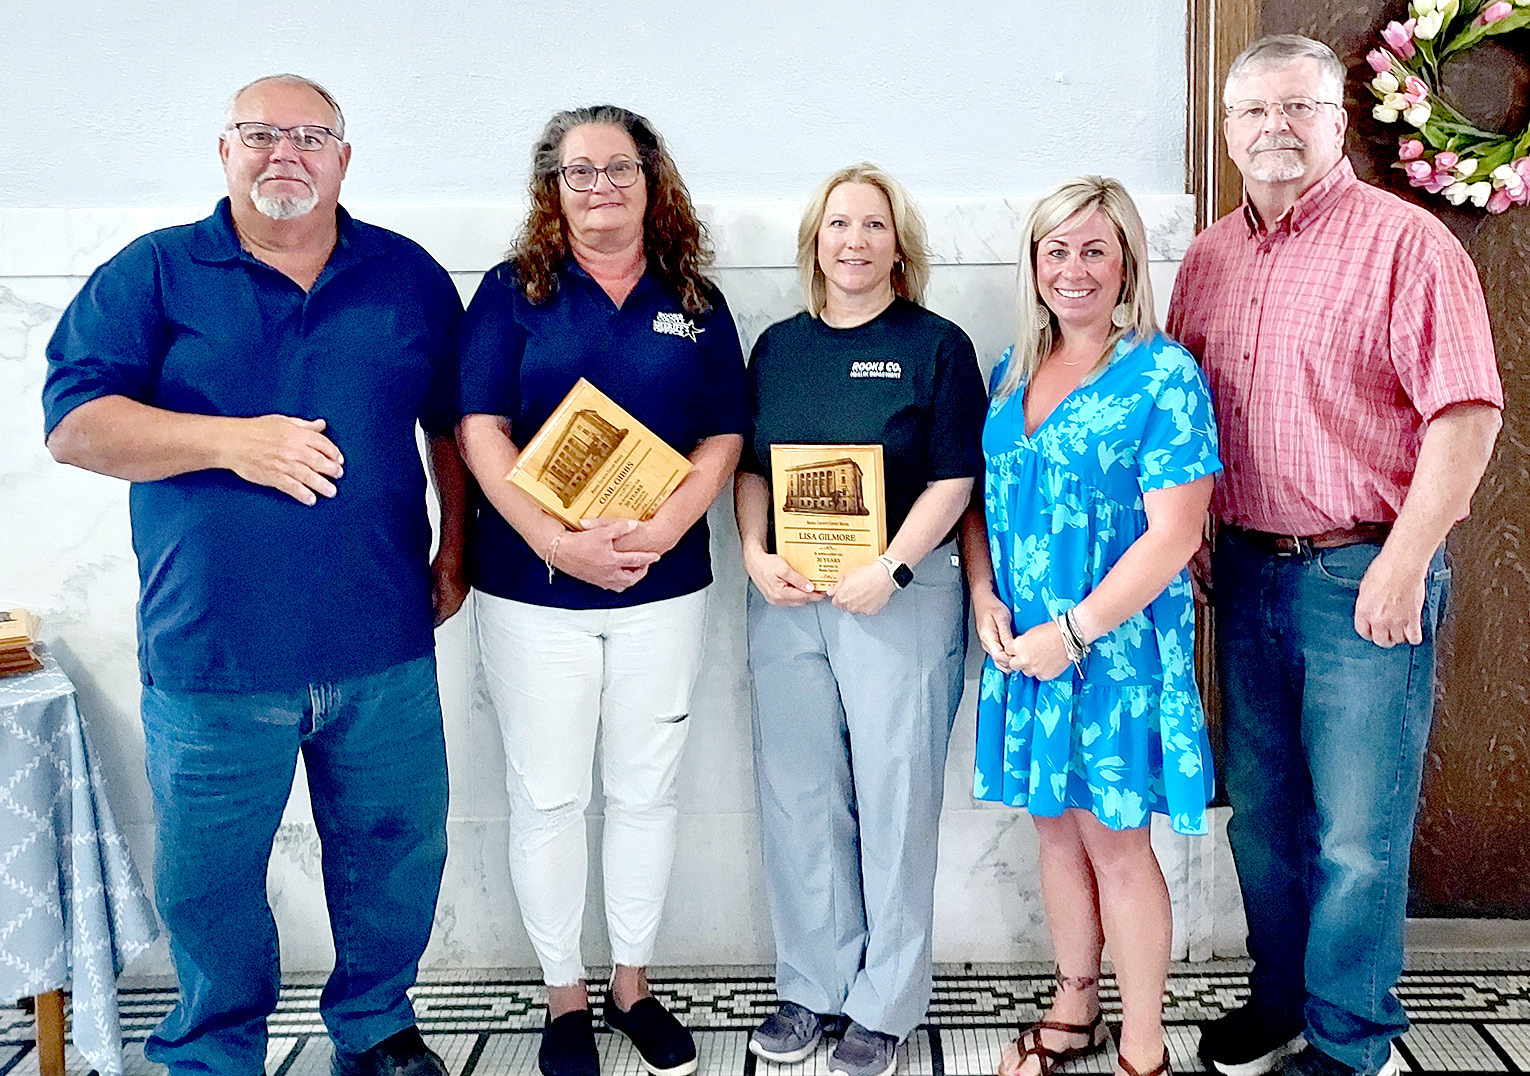 ROOKS COUNTY EMPLOYEES were presented with their 20year plaques at a recent Rooks County Commission meeting. Pictured are (from left): commissioner Tim Berland, Gail Gibbs, Lisa Gilmore, and commissioners Kayla Hilbrink and John Ruder (Not pictured was Jack Kuhlmann.)